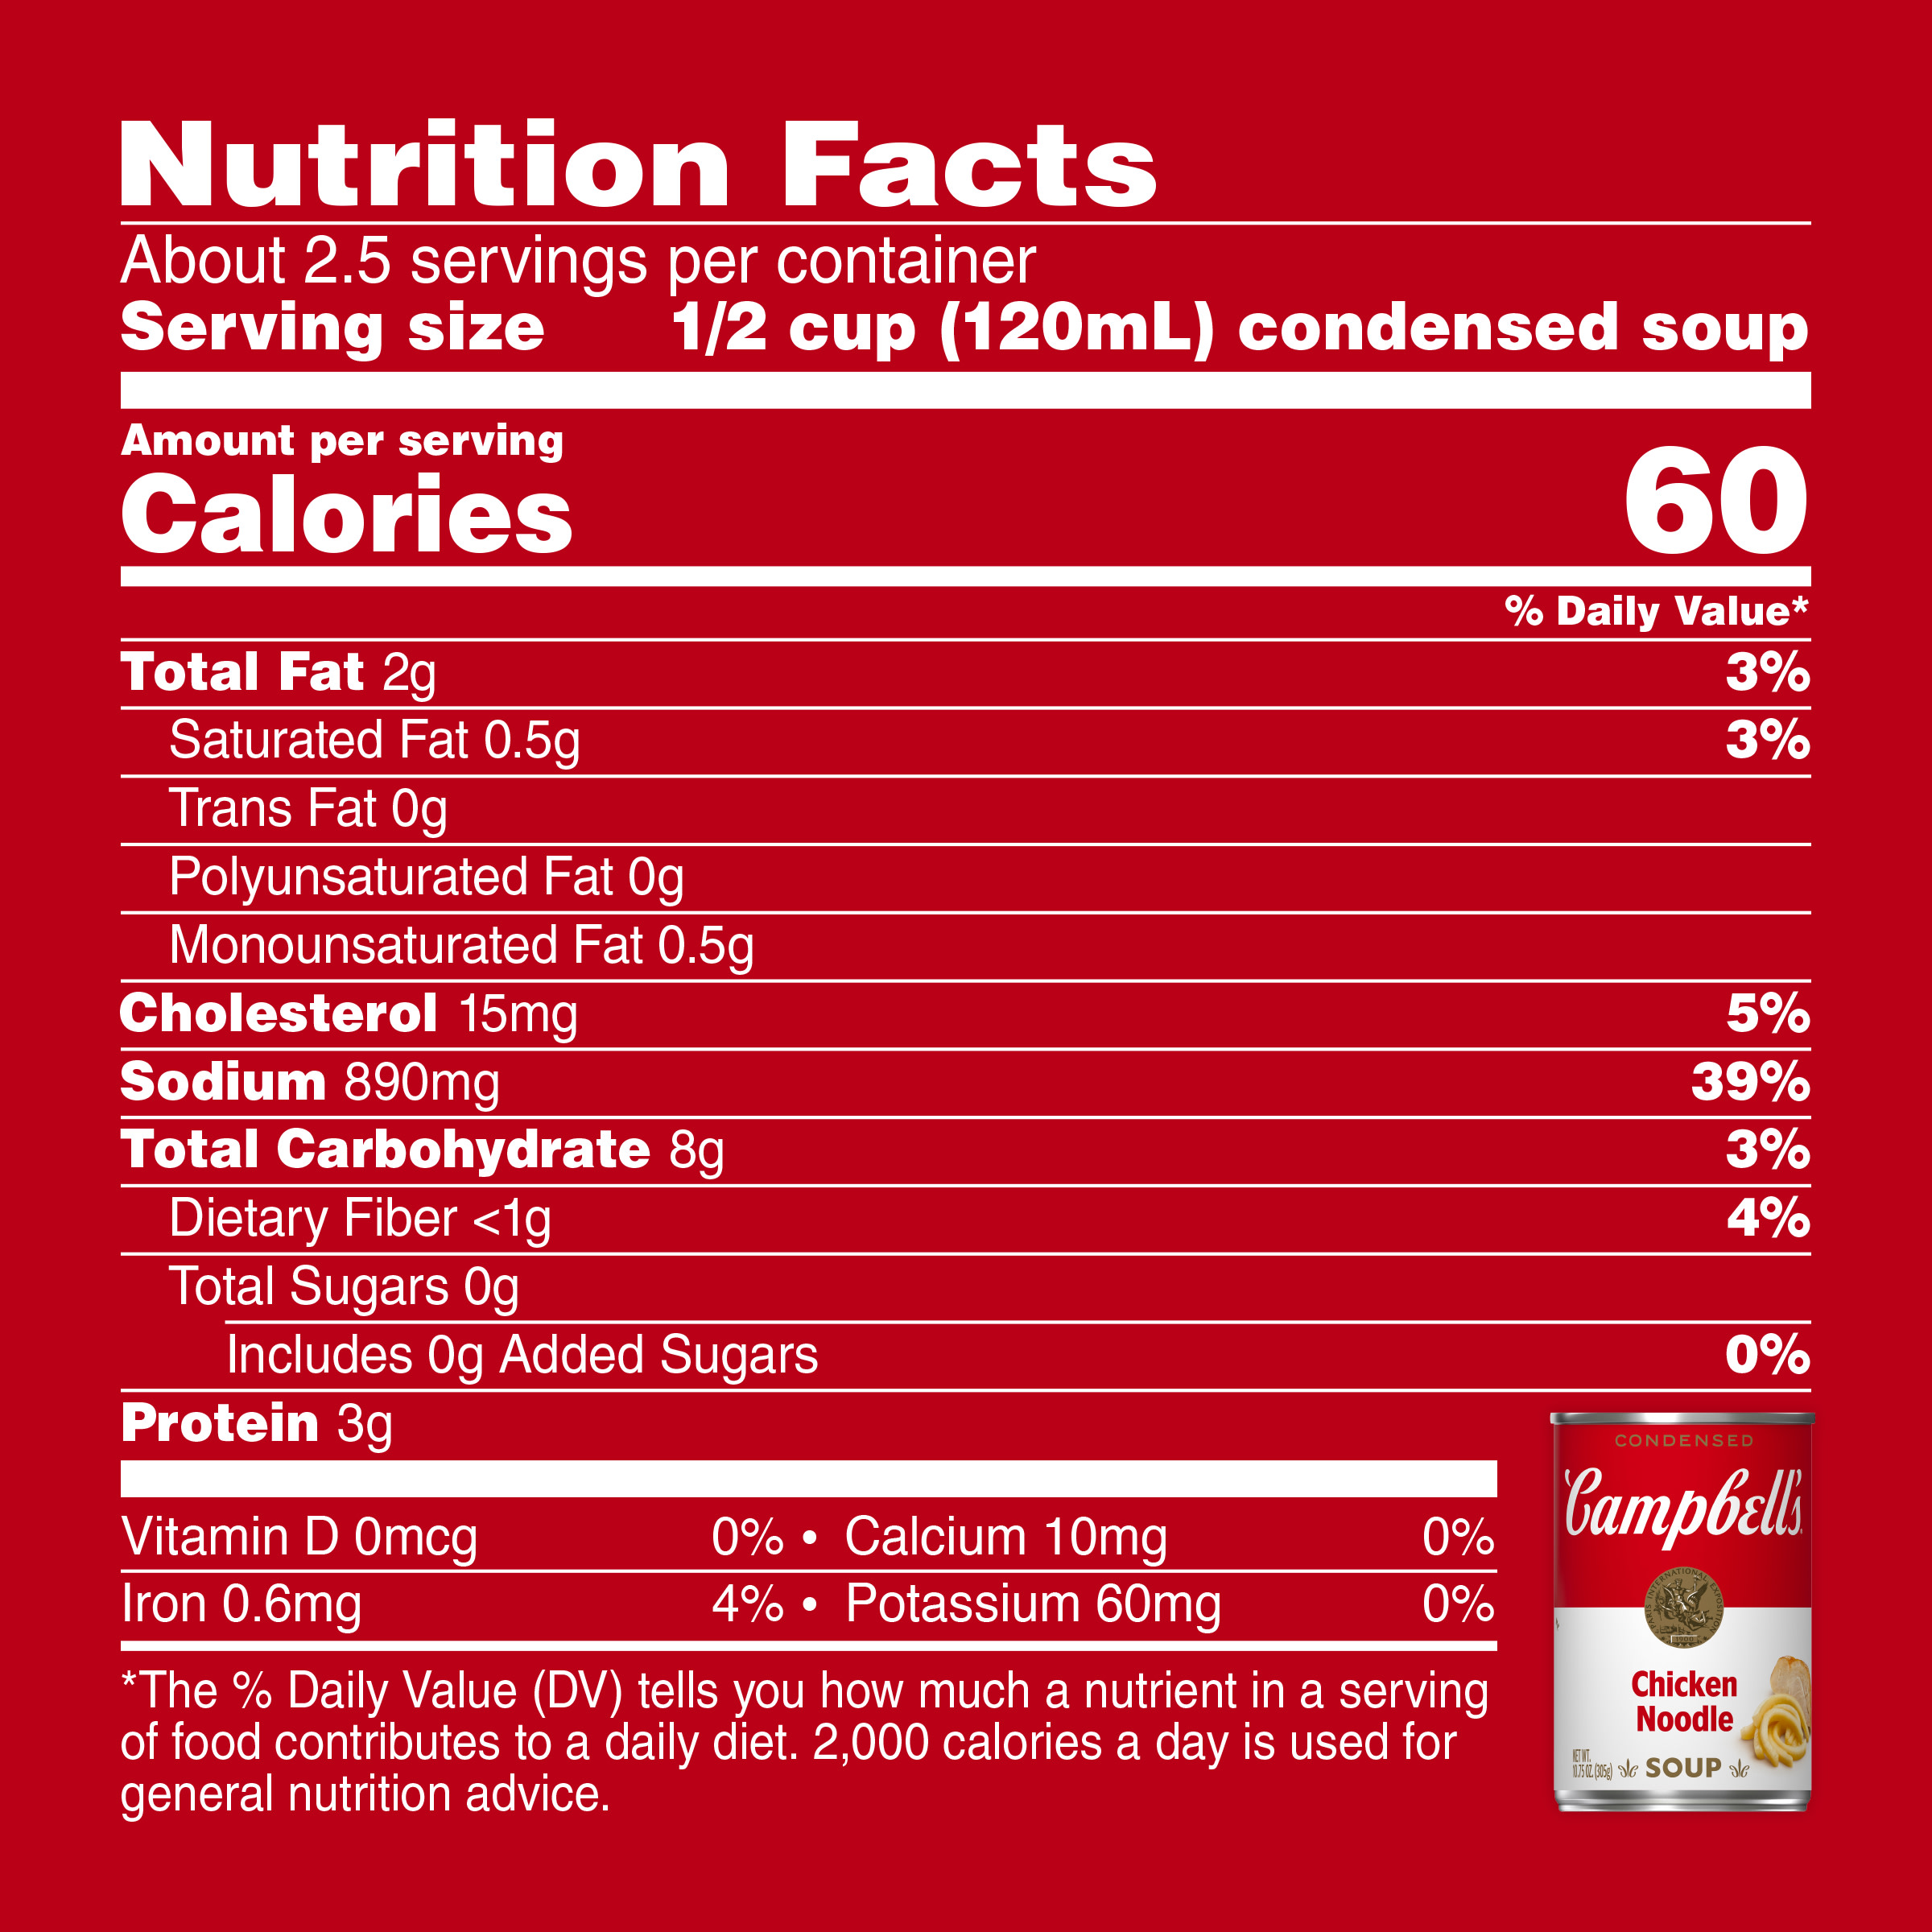 Campbell's Condensed Chicken Noodle Soup, 10.75 Ounce Can 